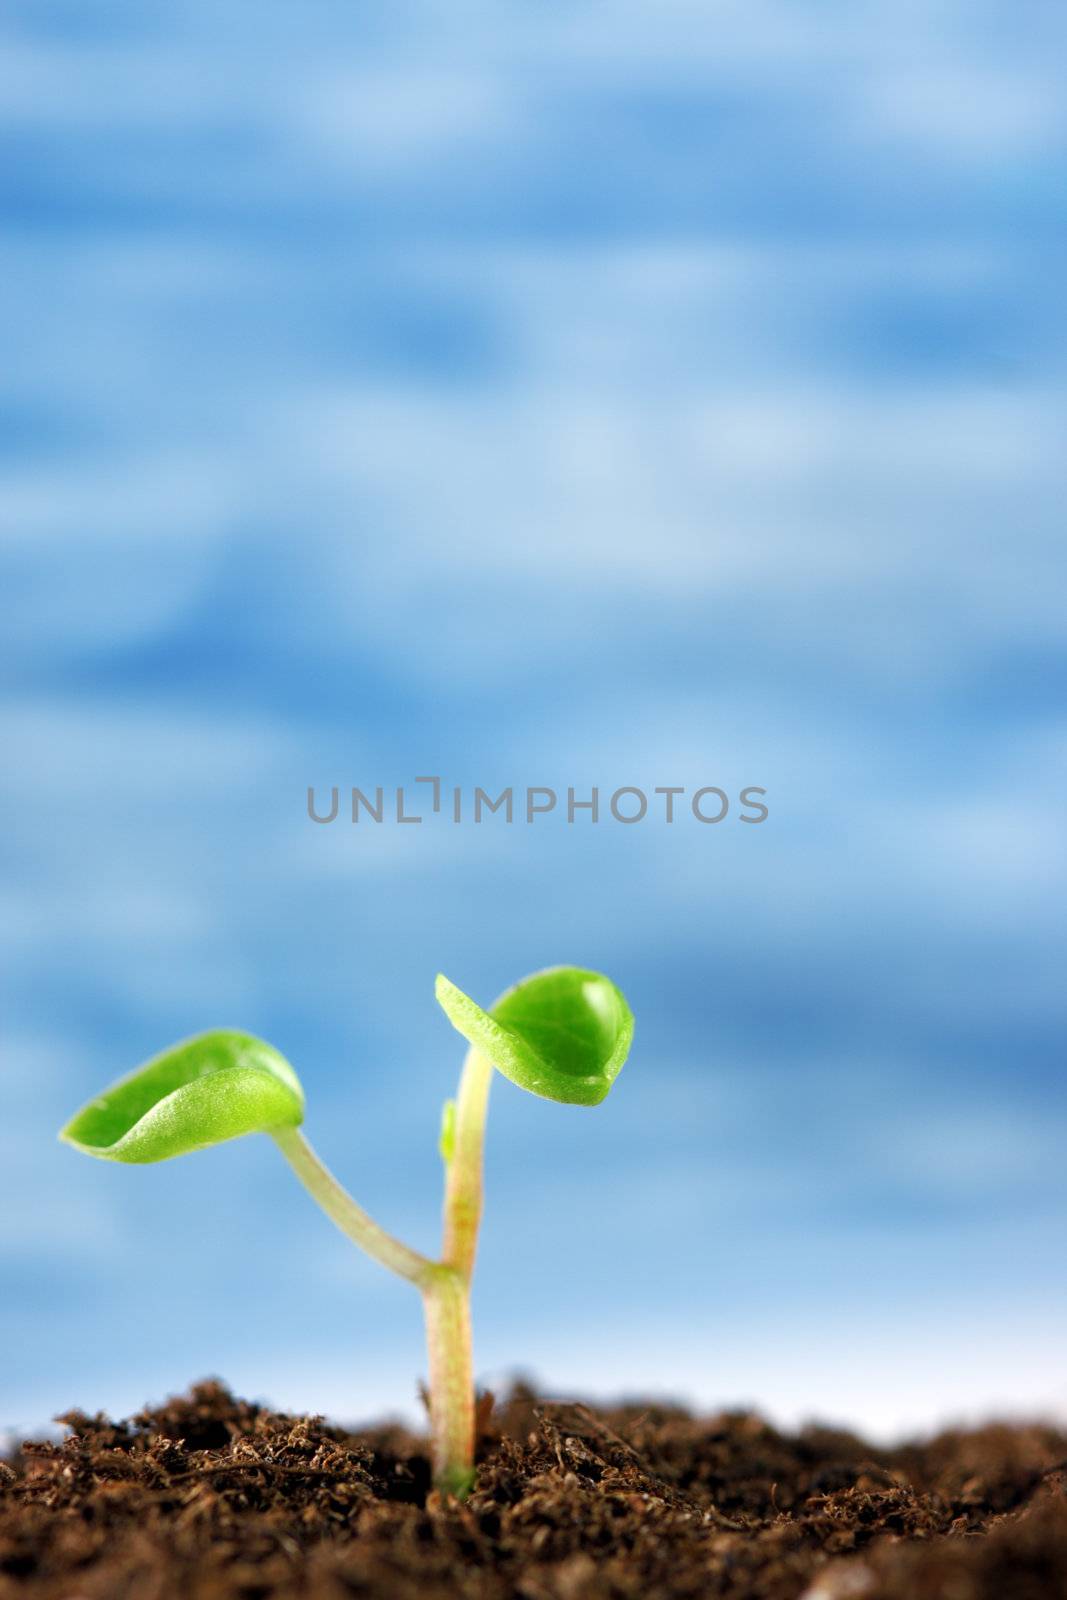 A small green plant emerges from the soil against a blue sky